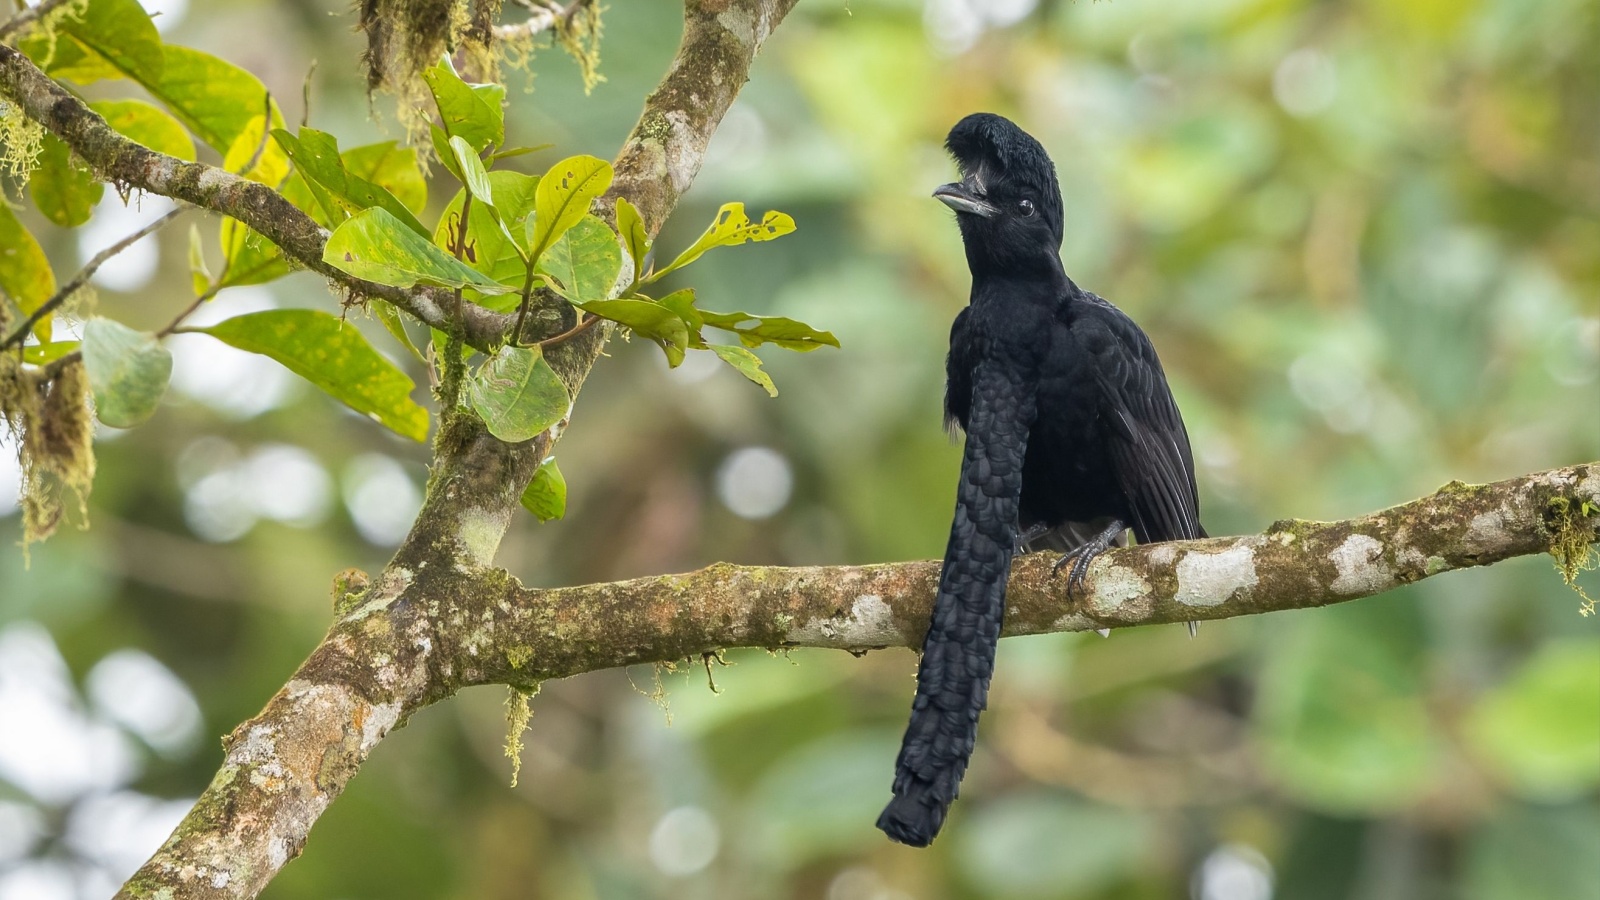 image credit: Wim Hoek/Shutterstock <p>The long-wattled umbrellabird, found in the humid forests of Colombia and Ecuador, has a large, umbrella-like crest on the top of its head and a long, inflatable wattle hanging from its neck. This wattle, which can be inflated during mating displays to attract females, makes it one of the most bizarre-looking birds in the world.</p>